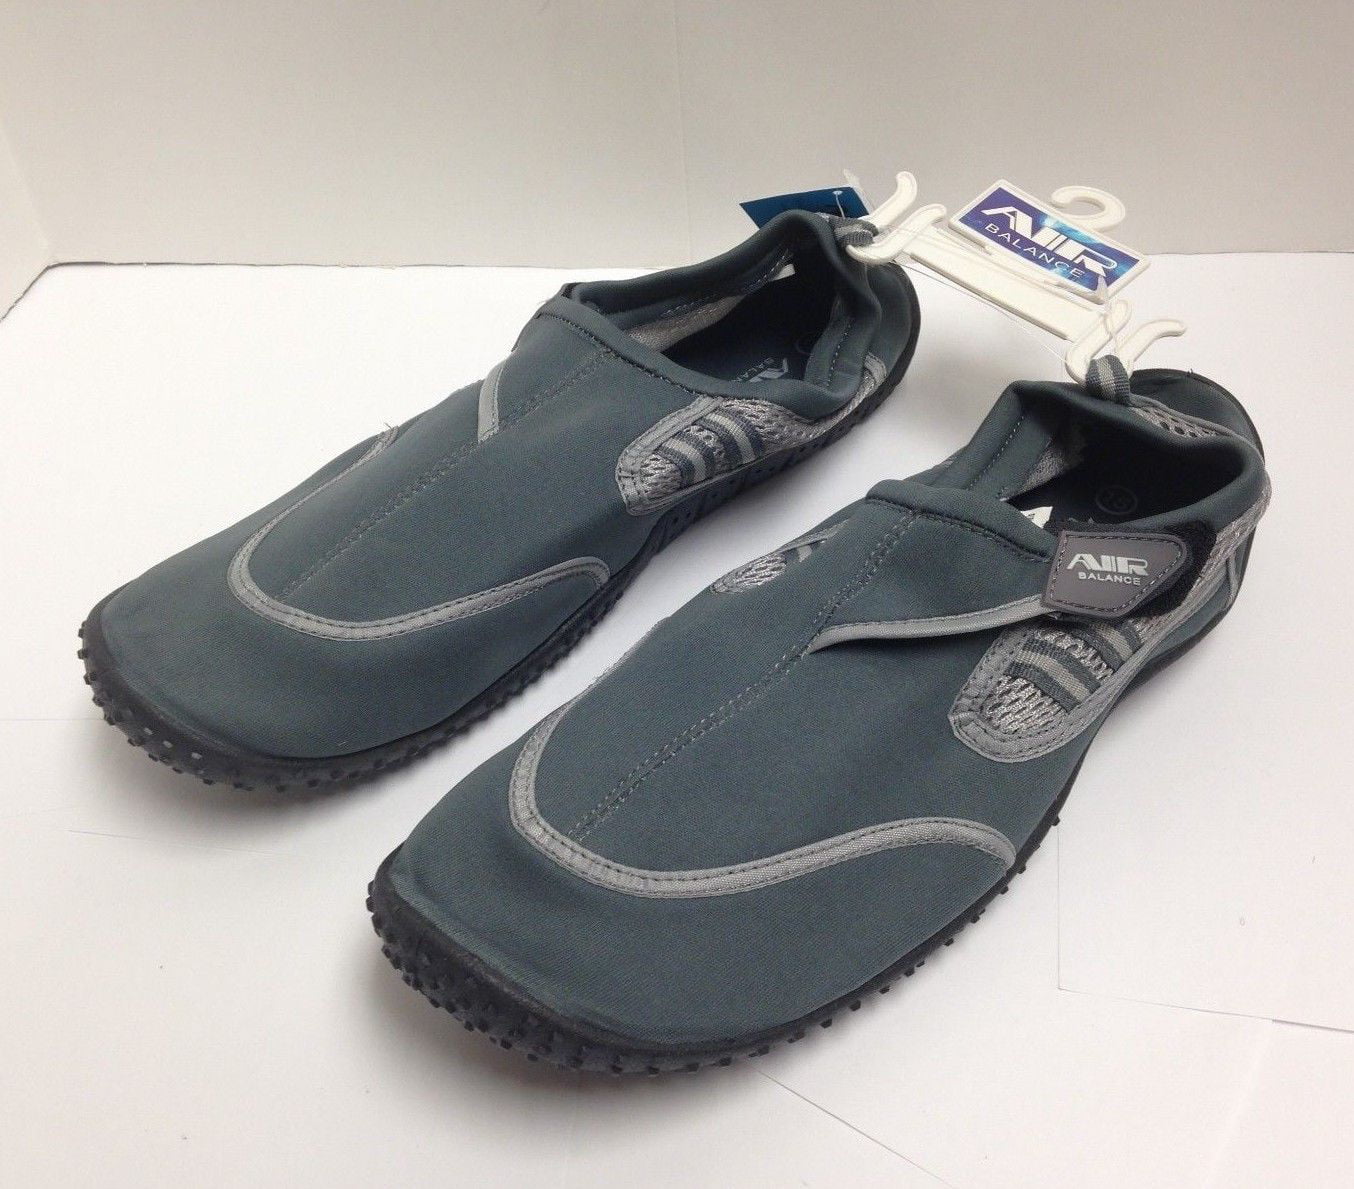 size 15 water shoes